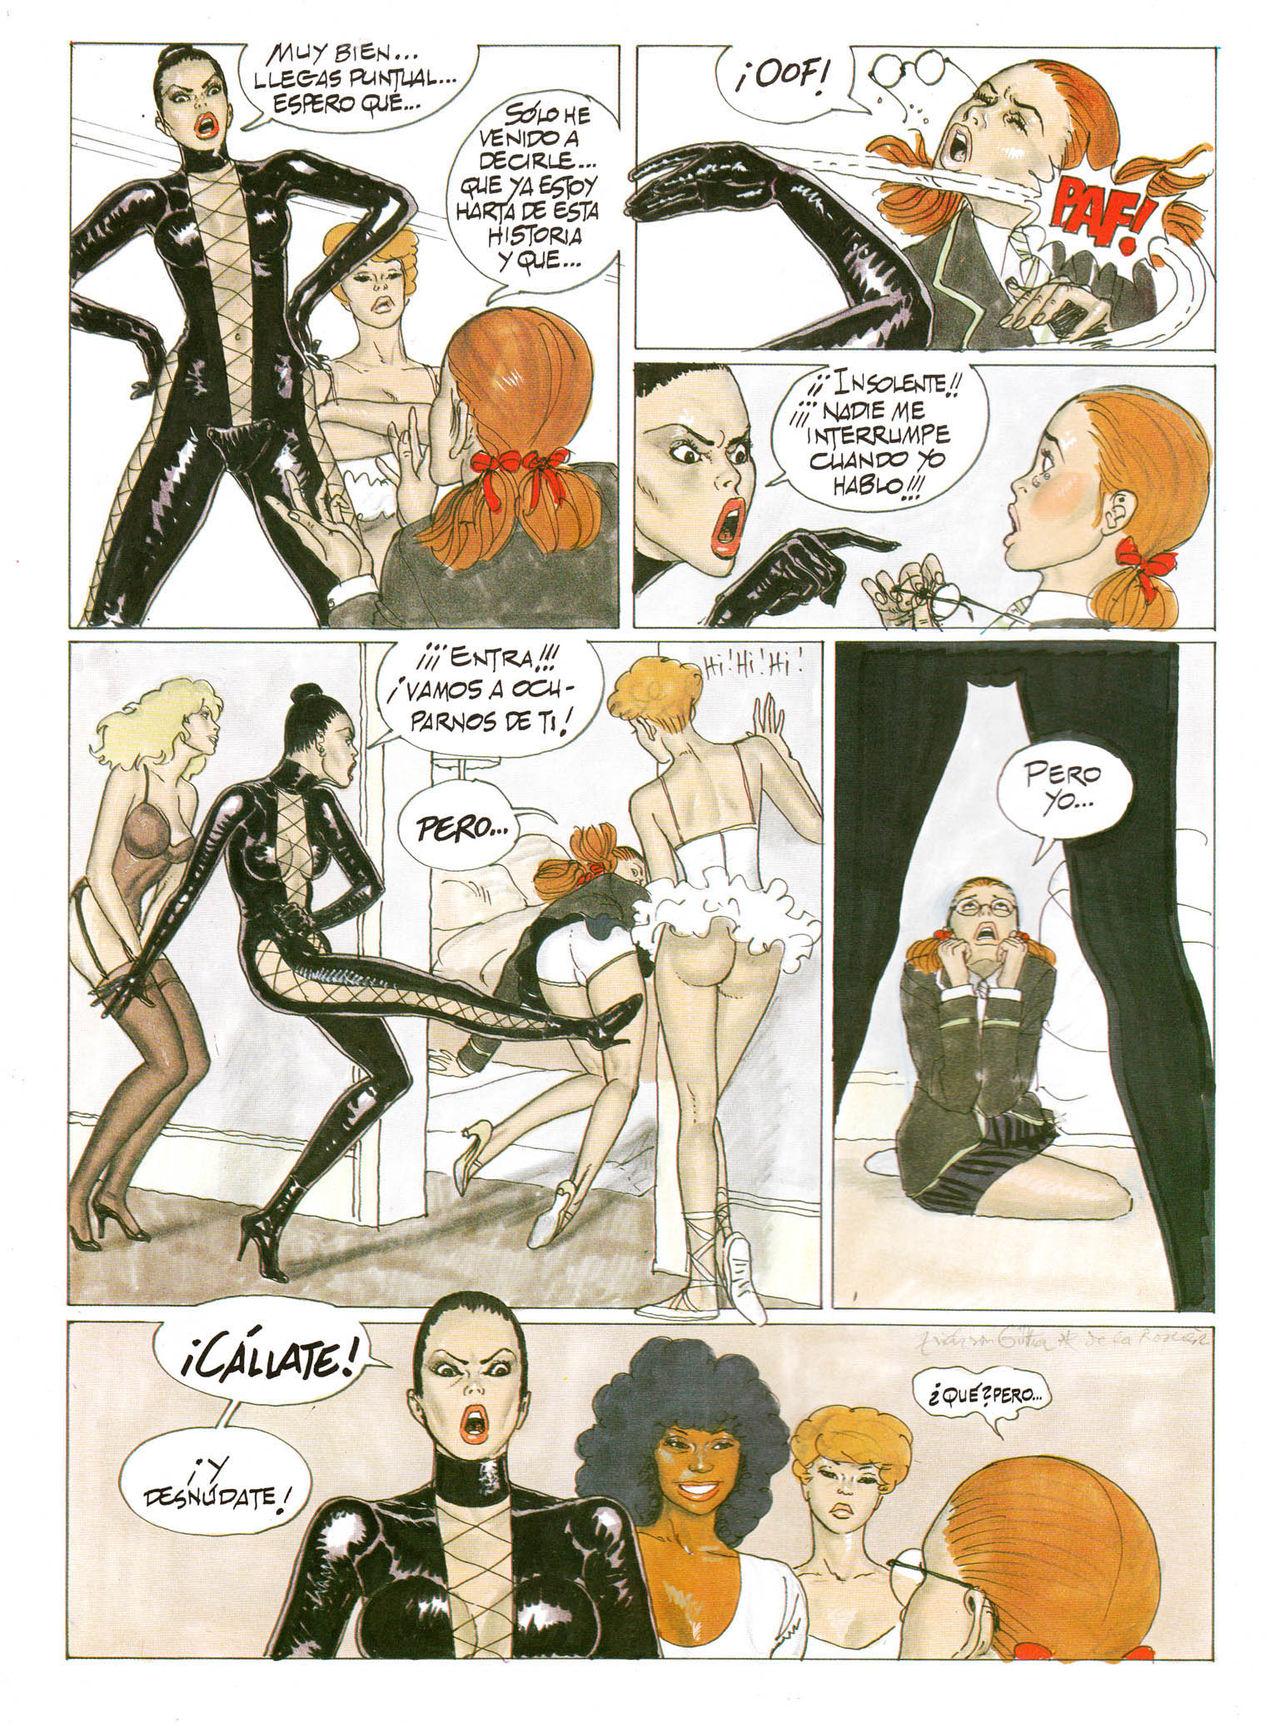 Kiss Comix 034 image number 7